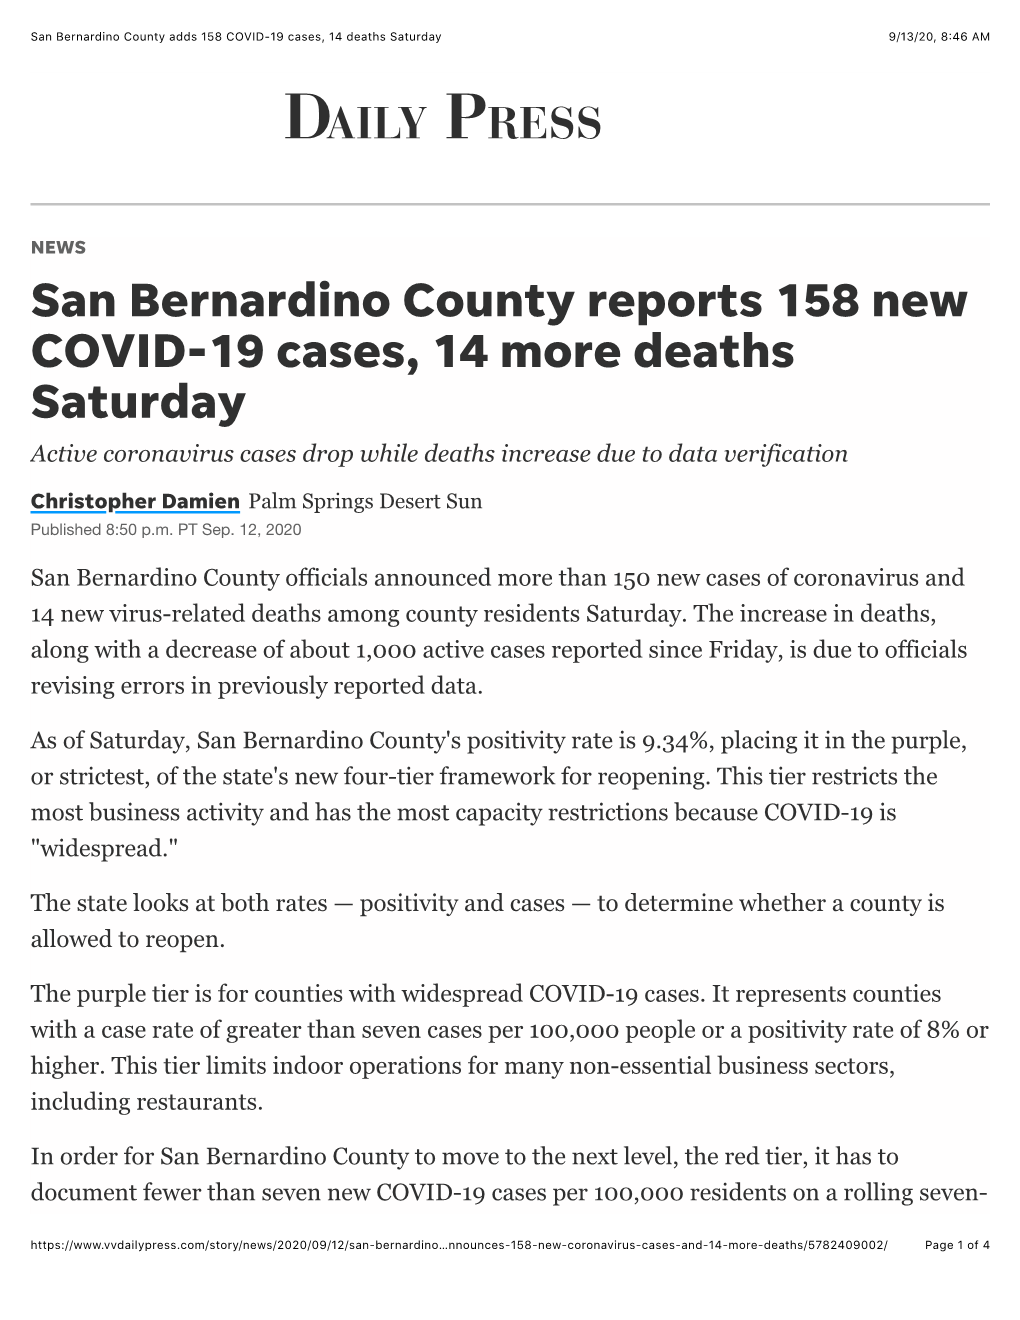 San Bernardino County Reports 158 New COVID-19 Cases, 14 More Deaths Saturday Active Coronavirus Cases Drop While Deaths Increase Due to Data Verification